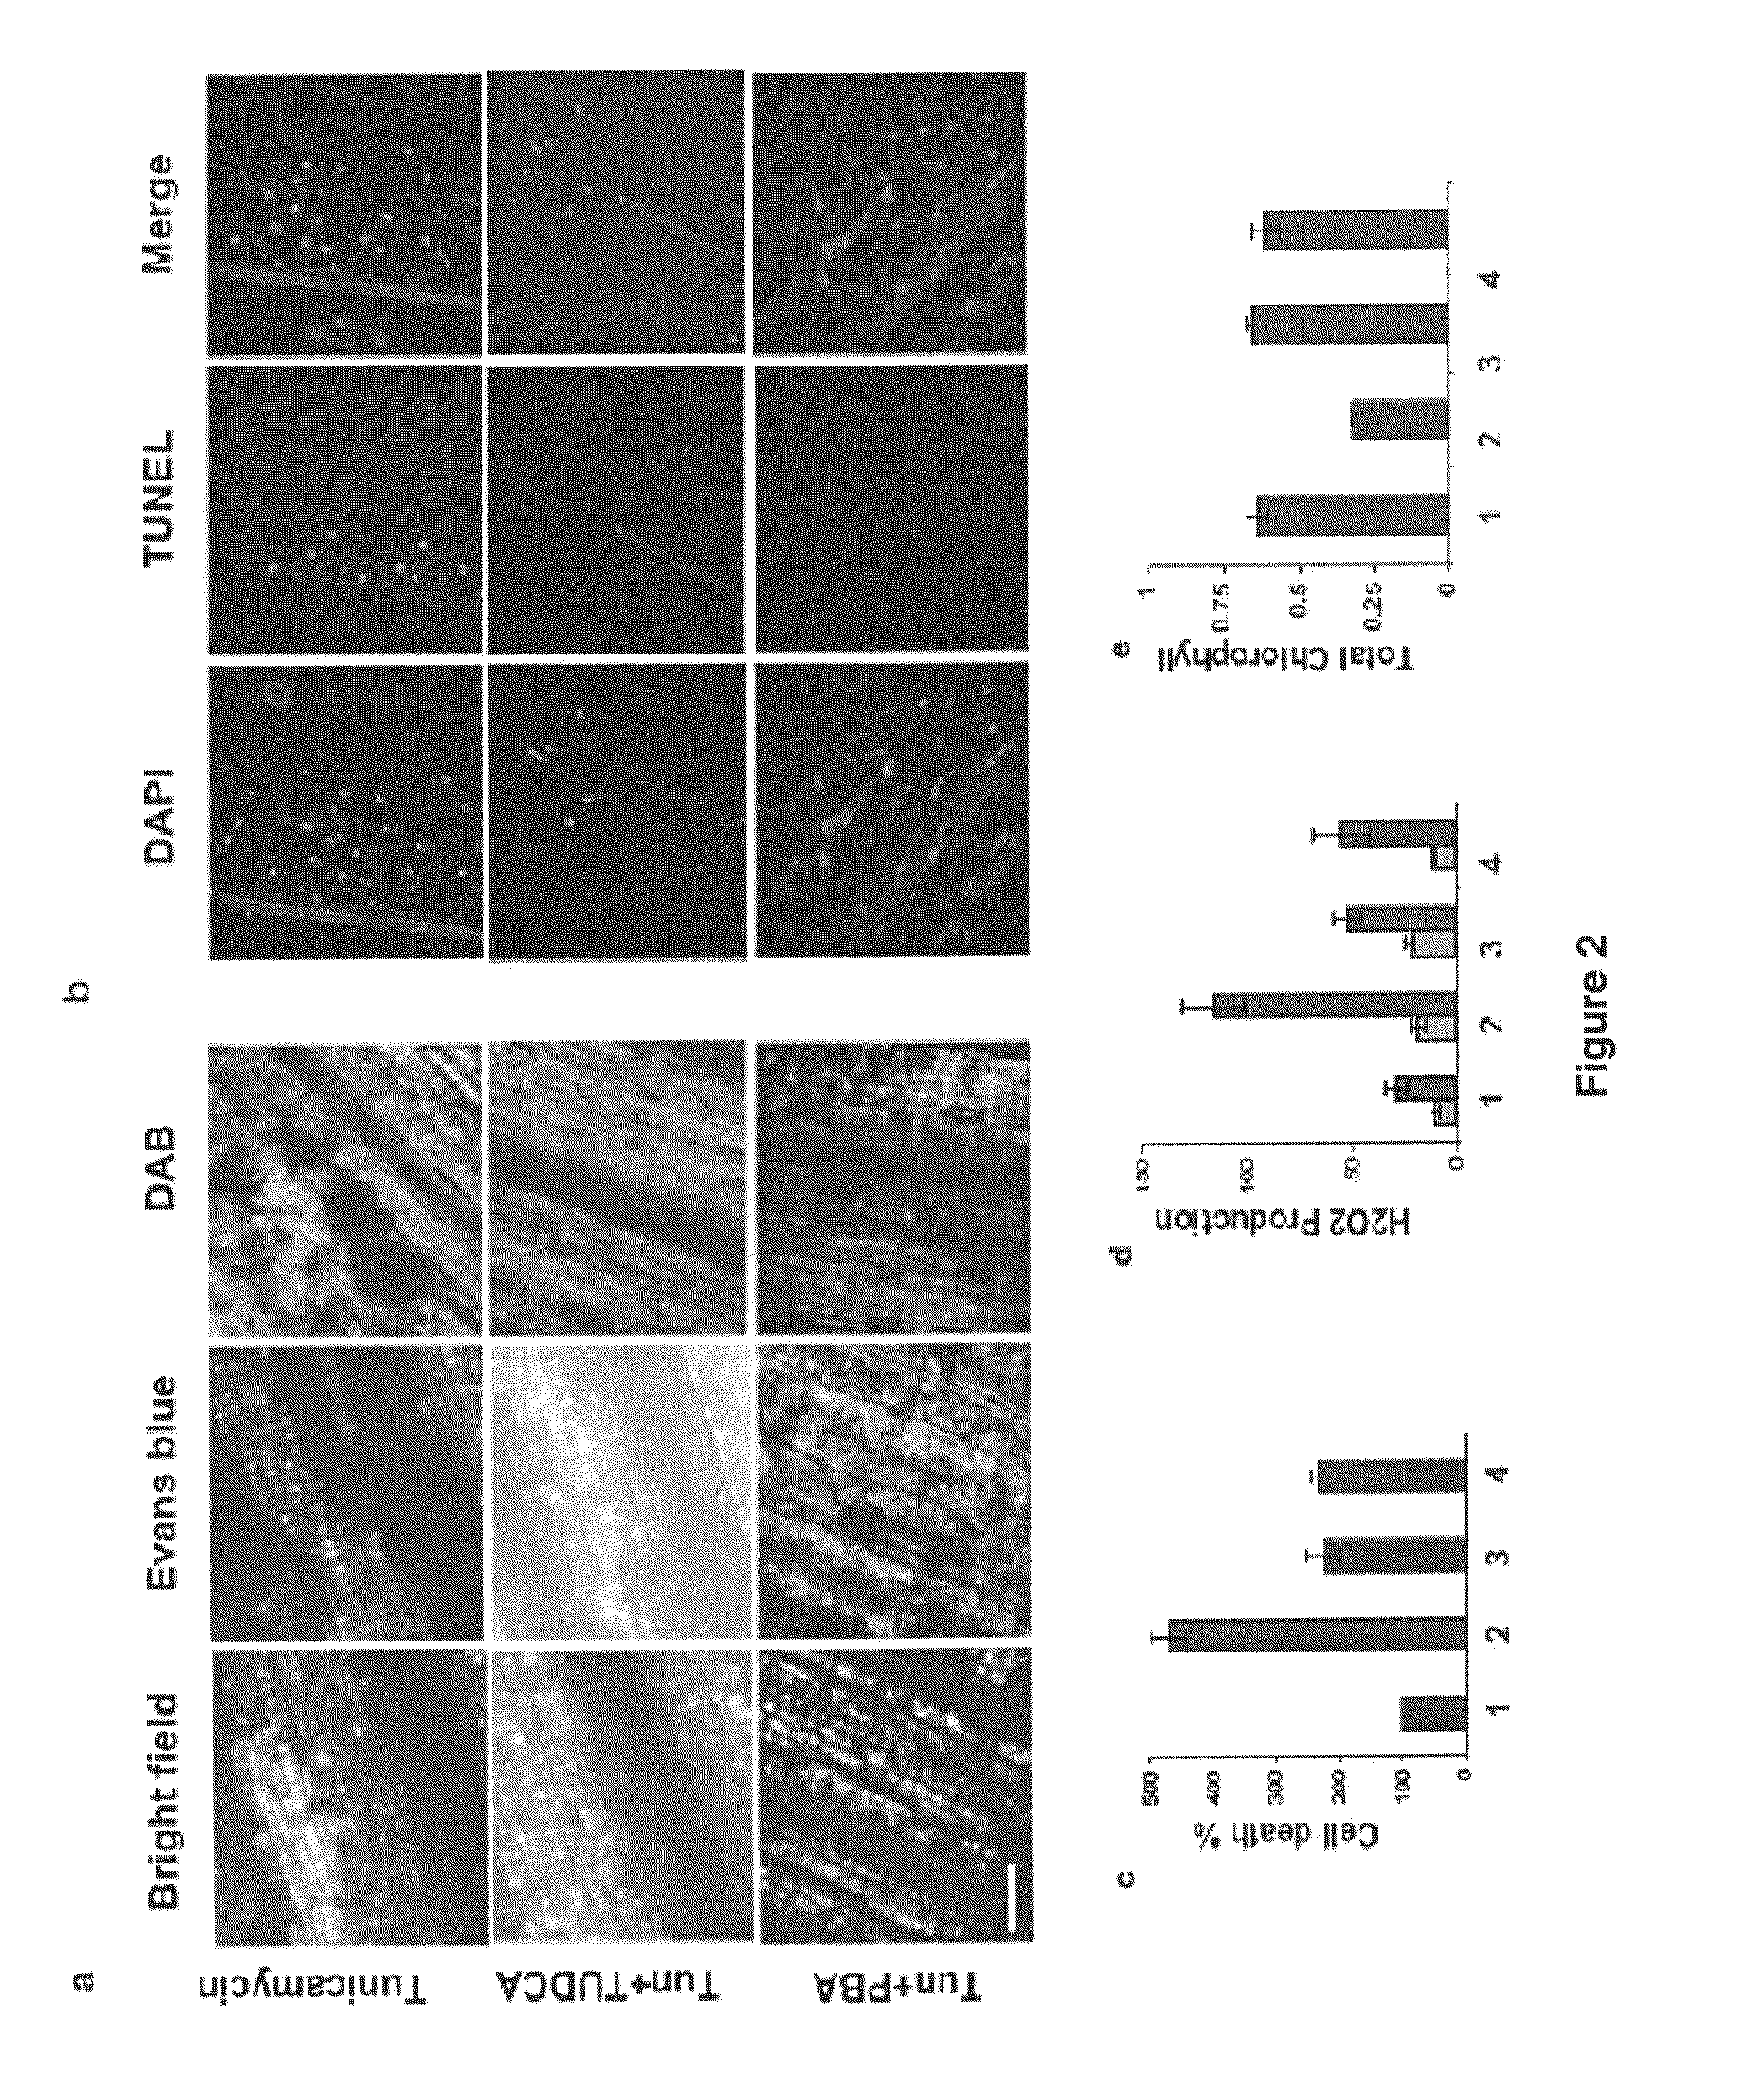 Chemical chaperones and methods of use thereof for inhibiting proliferation of the phytopathogenic fungus Fusarium ssp.